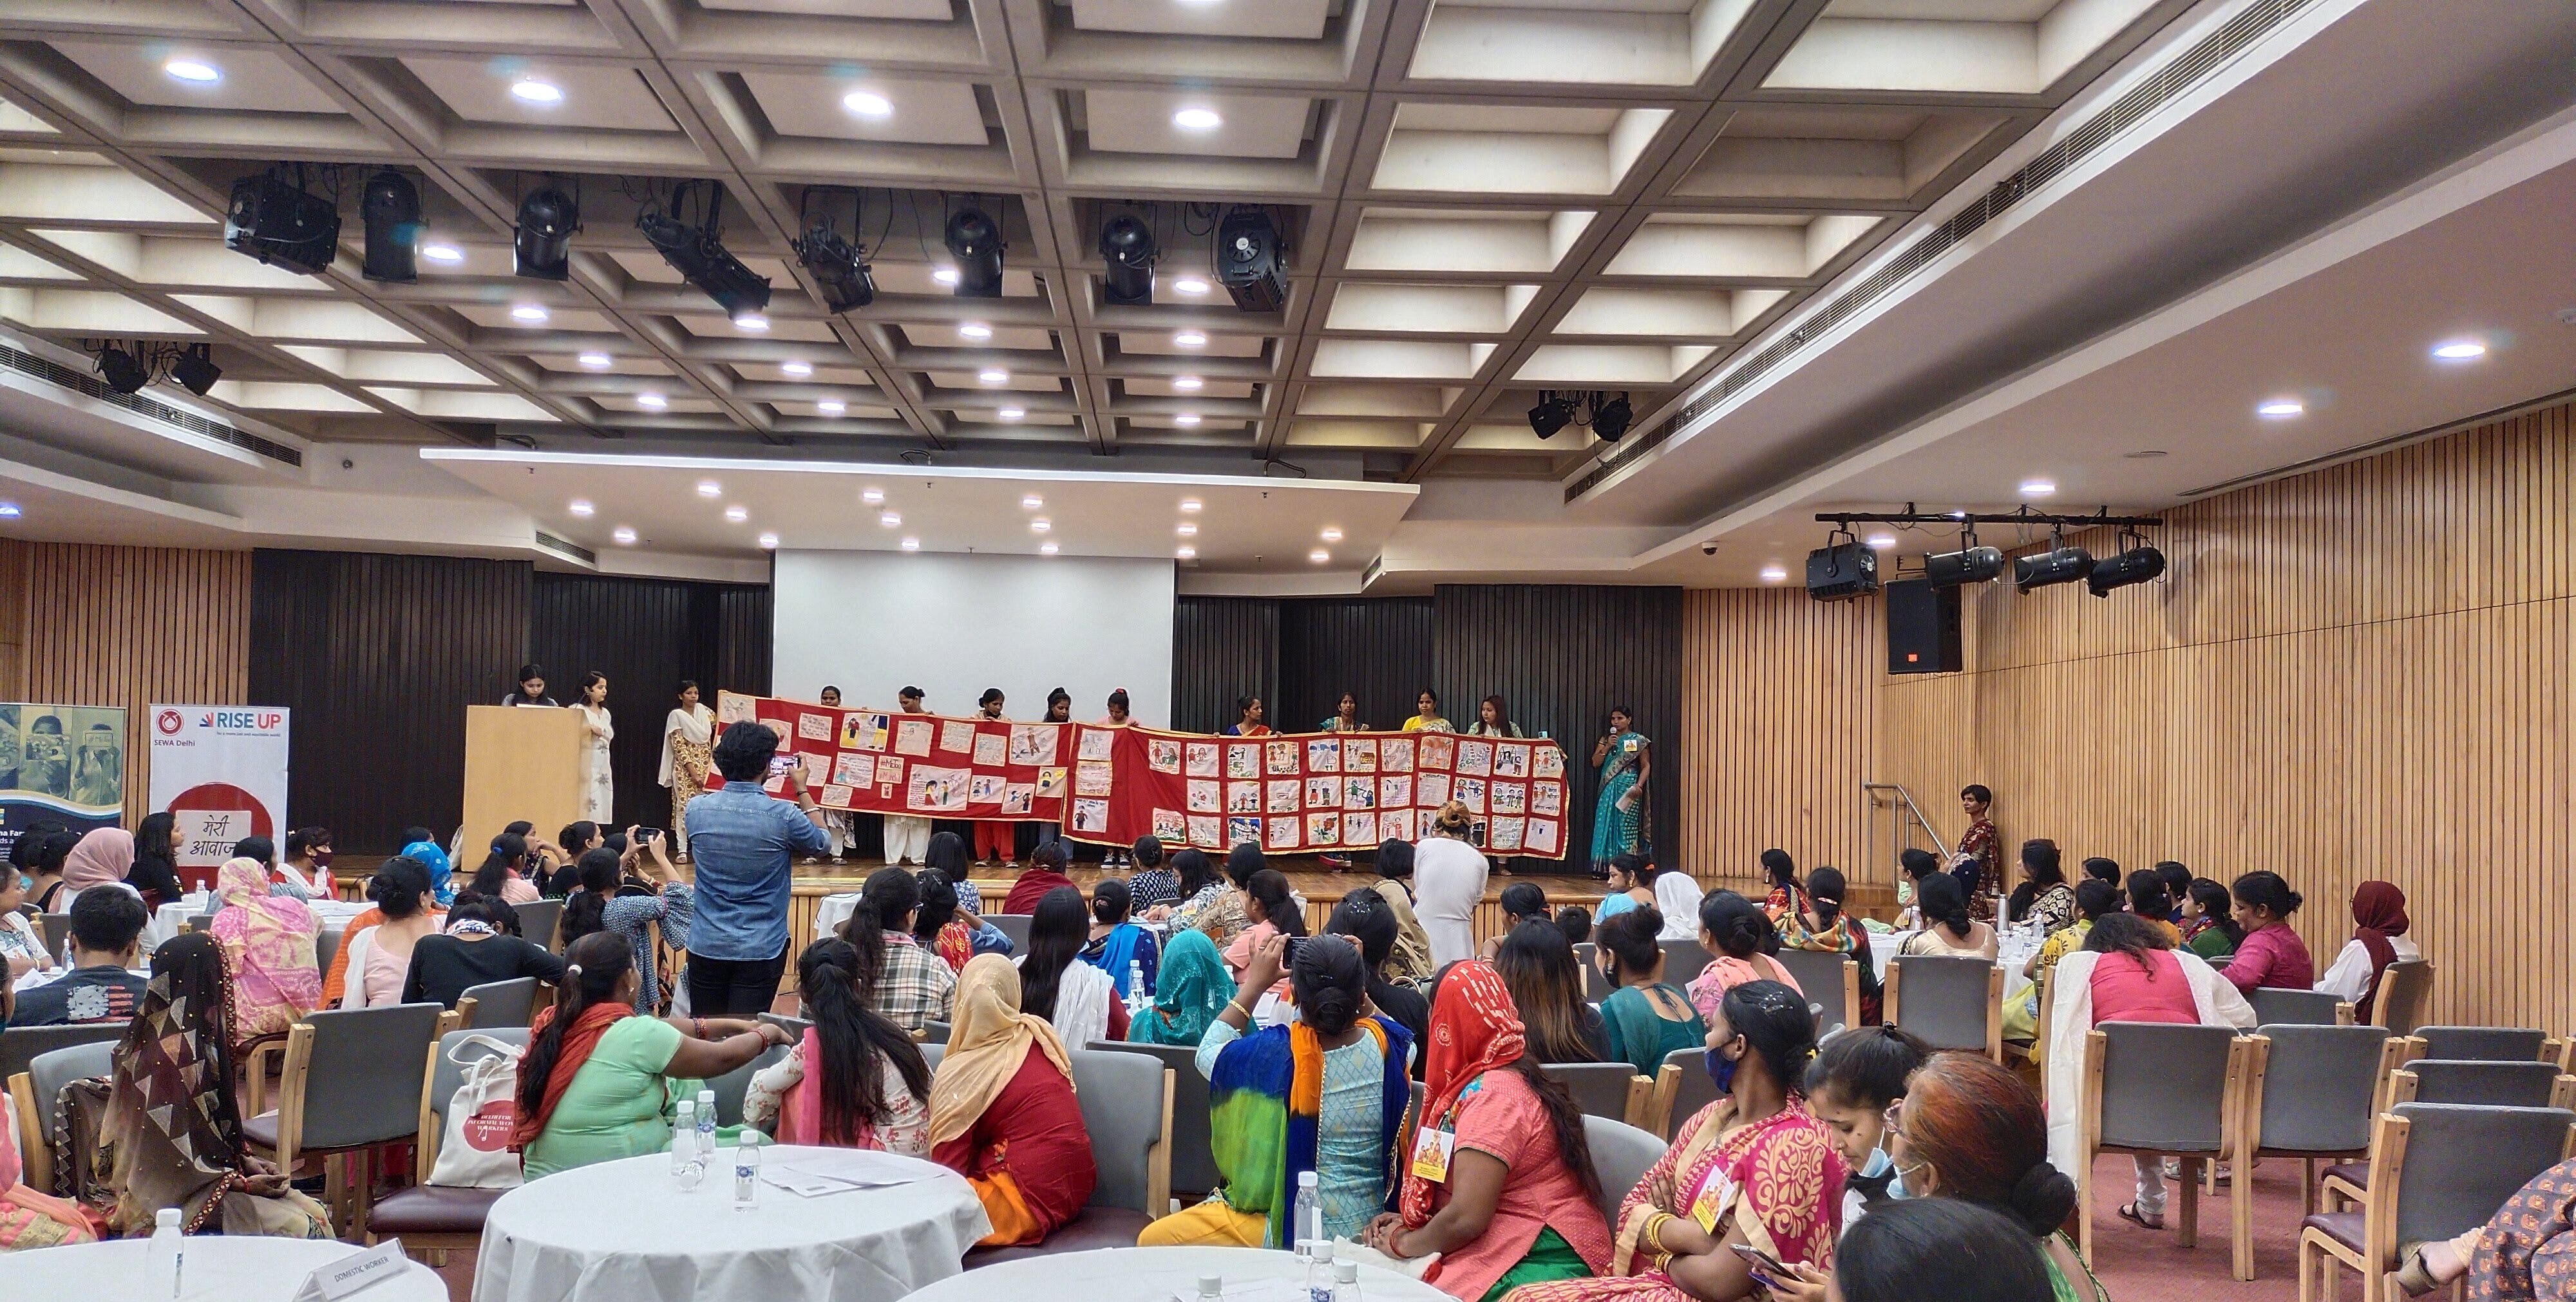 Large group of women domestic workers in a conference room looking at women on a stage showing a very long piece of red tissue (sari) where they stitched their experiences of sexual harassment in the workplace.